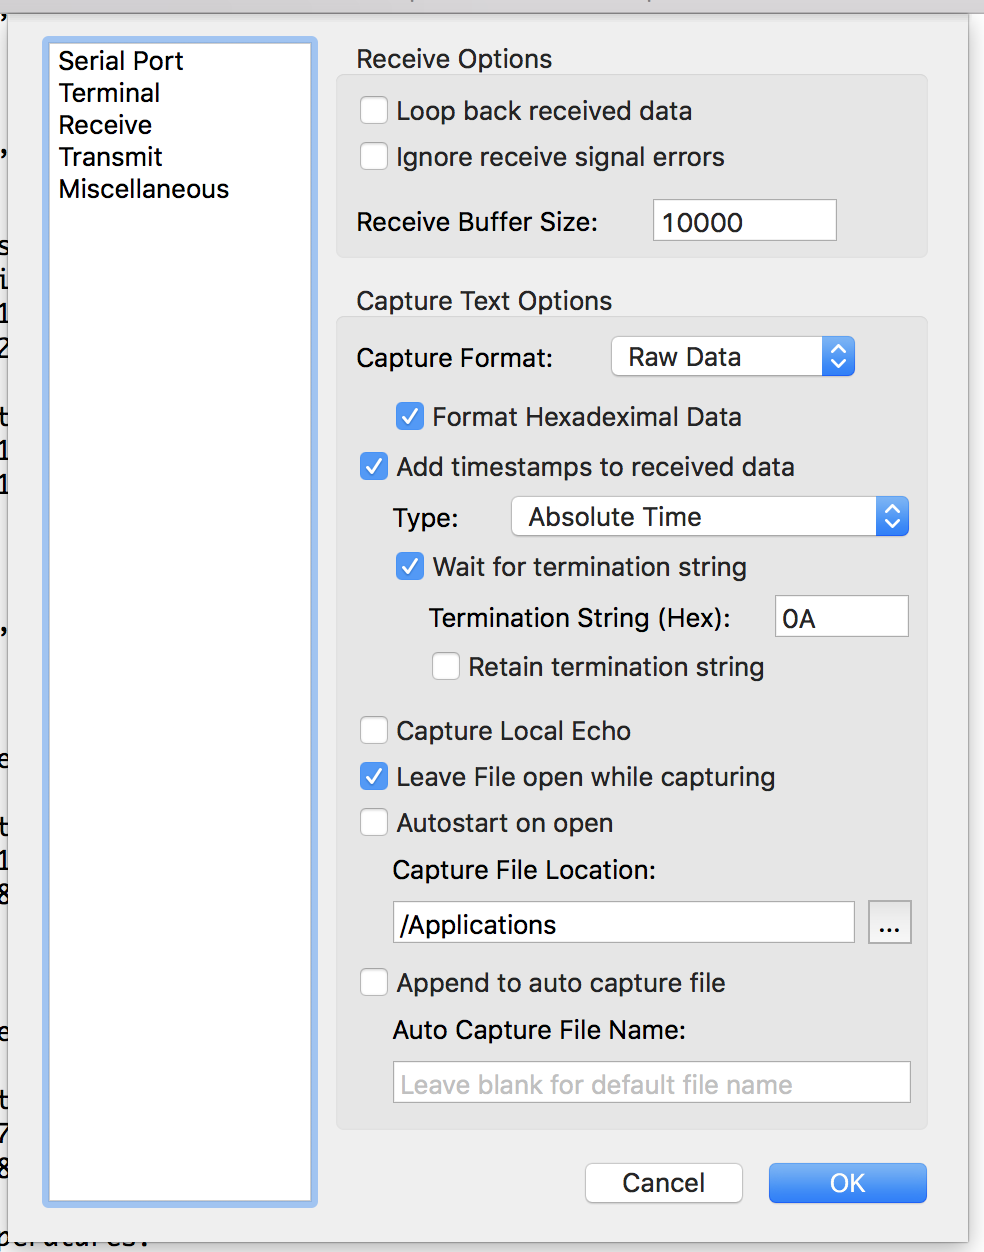 coolterm macos serial settings